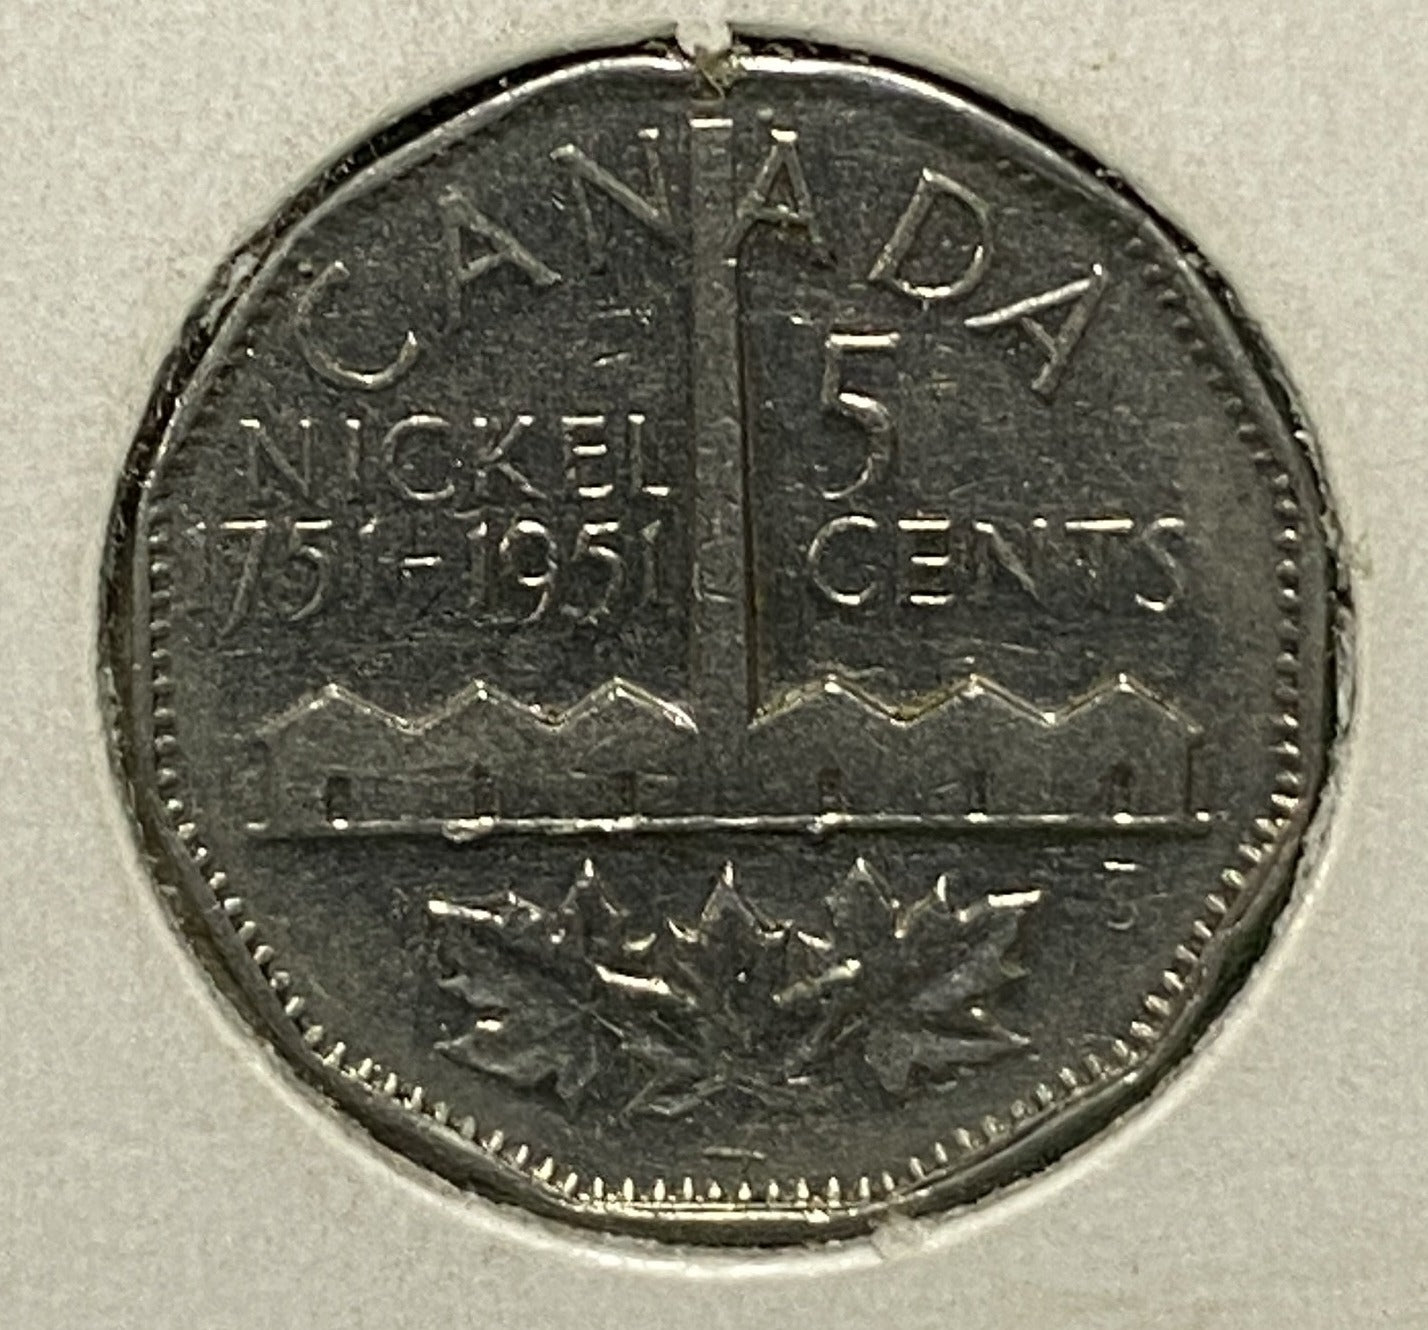 CANADIAN 1951 COMMEMORATIVE NICKEL 5 CENTS COIN GEORGE VI (VF+/EF)